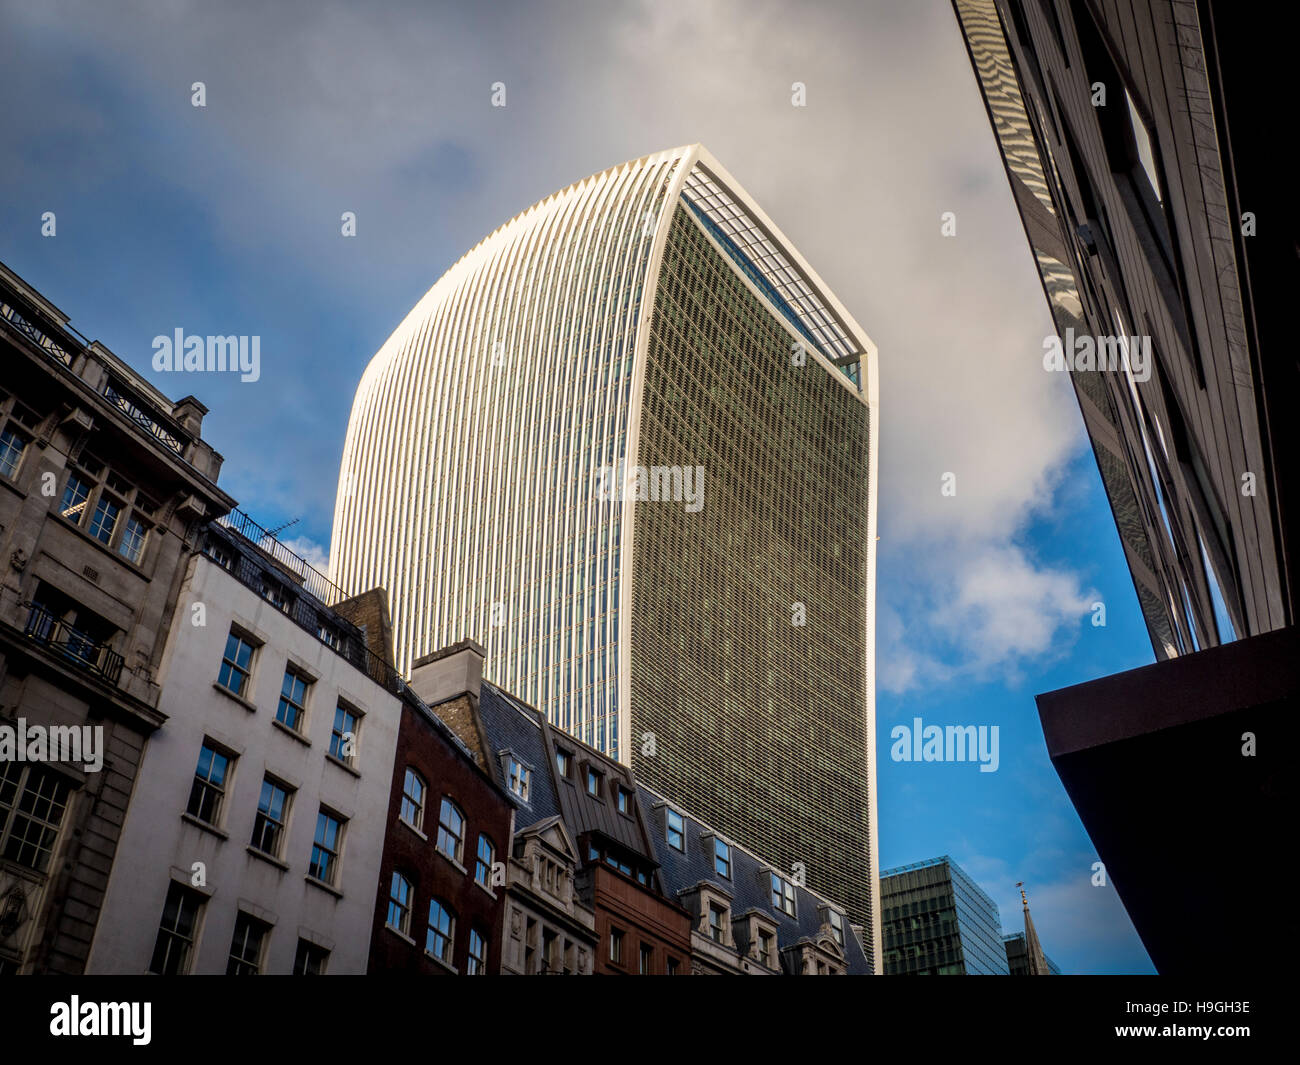 Exterior of 20 Fenchurch Street, known as the Walkie Talkie building, London, UK. Stock Photo